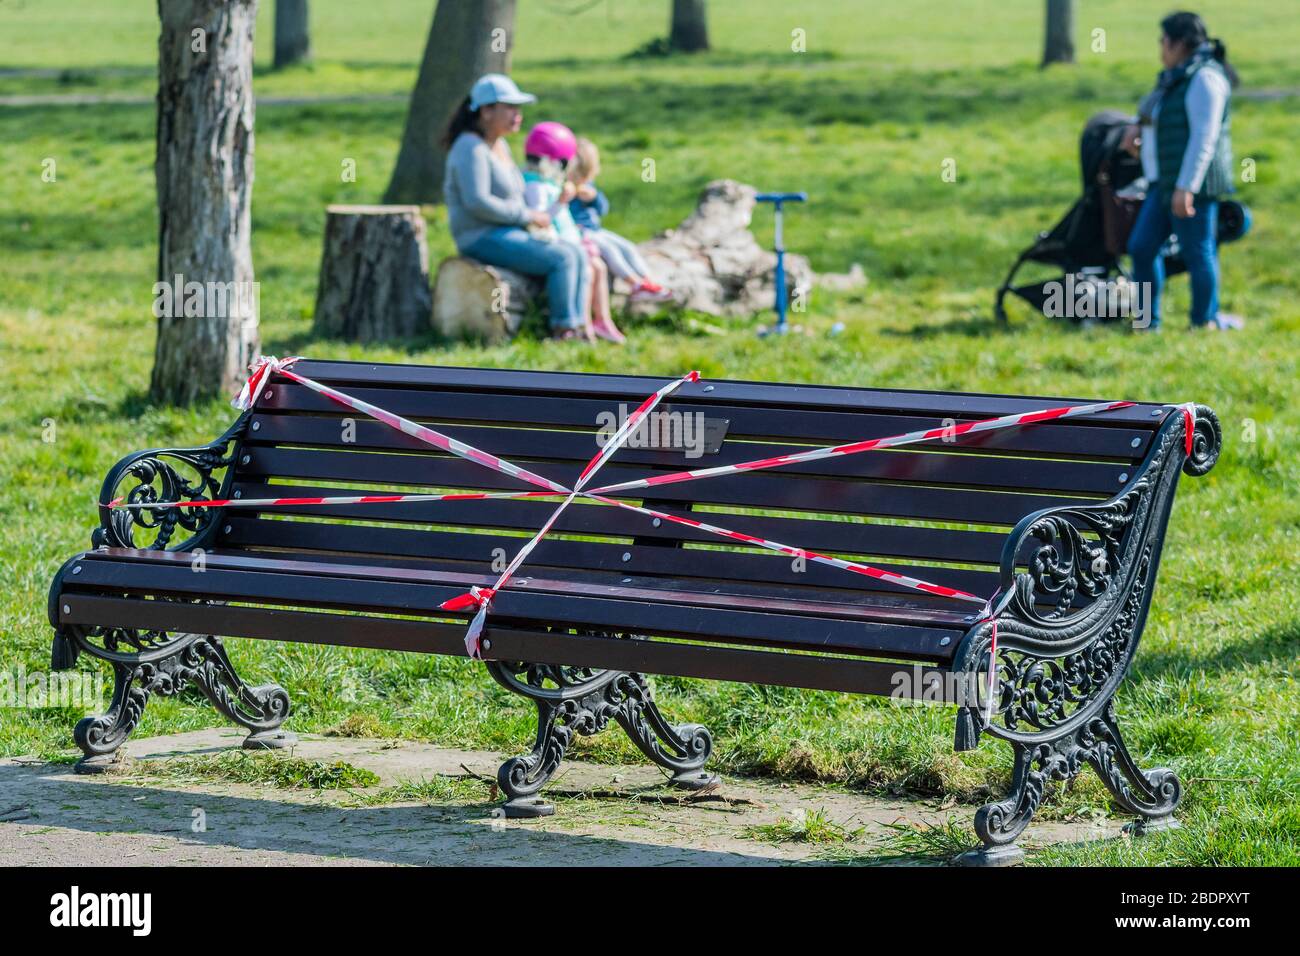 London, UK. 09th Apr, 2020. The benches may be taped off, but there is always somewhere else to sit - Clapham Common is pretty quiet now Lambeth Council has taped up all the benches. The 'lockdown' continues for the Coronavirus (Covid 19) outbreak in London. Credit: Guy Bell/Alamy Live News Stock Photo